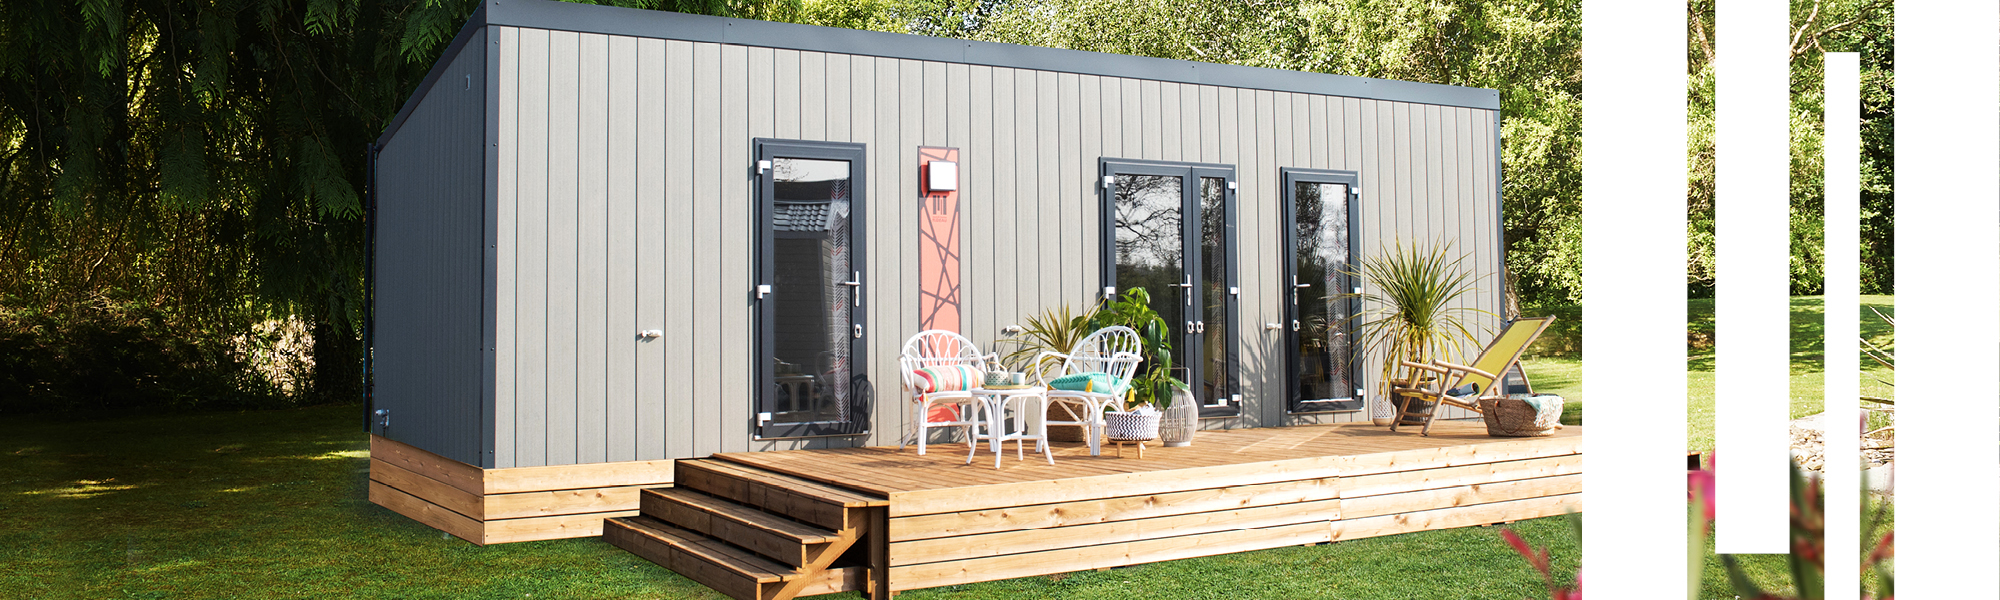 Actu collection 2020 mobil home